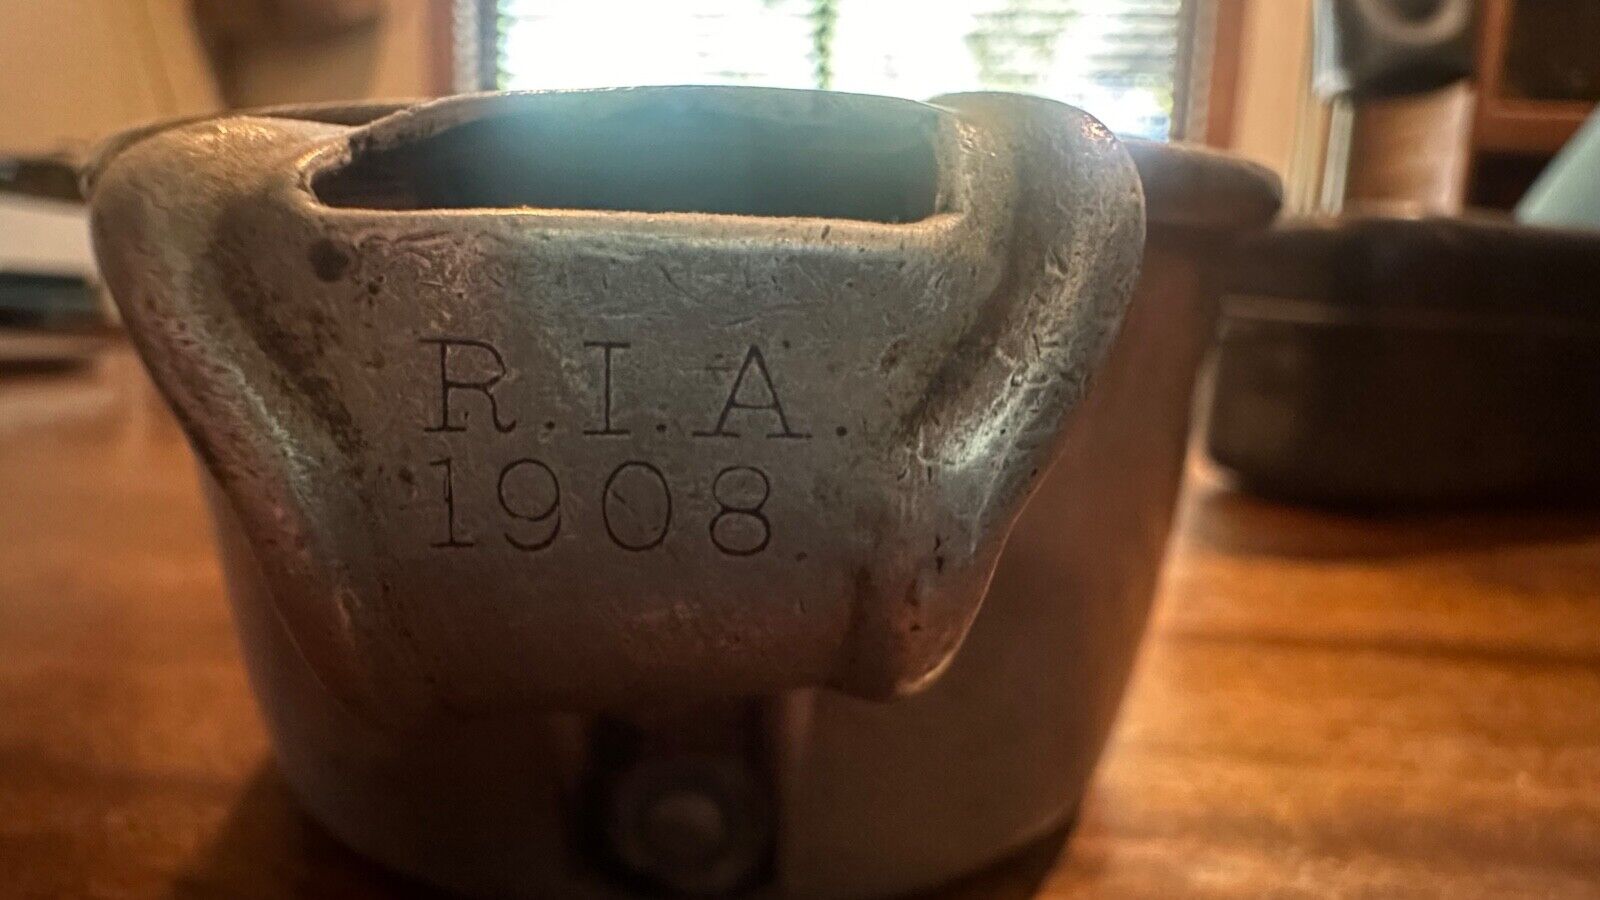 1908 EXPERIMANTAL CUP US MADE EXPERIMENTAL MARKED R.I.A. ALUMINUM